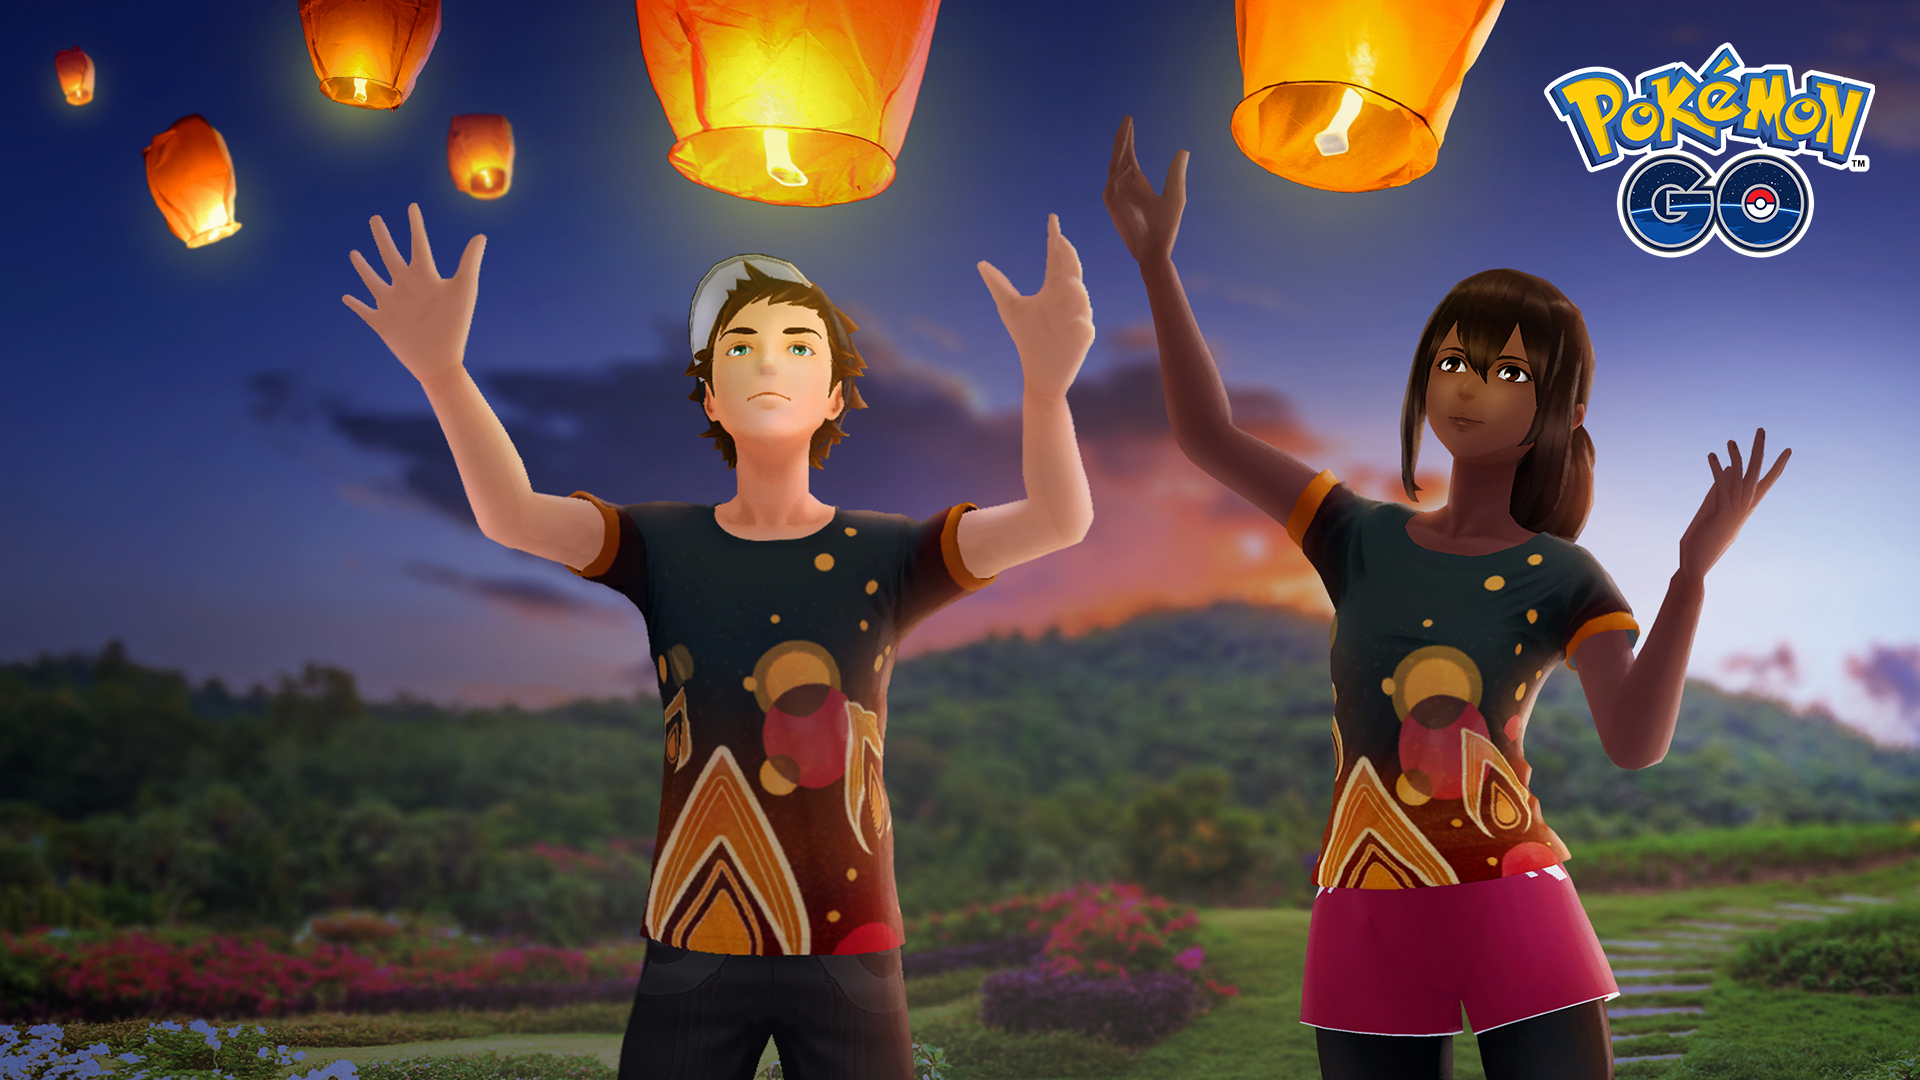 Festival of Lights shirt from the in-game shop